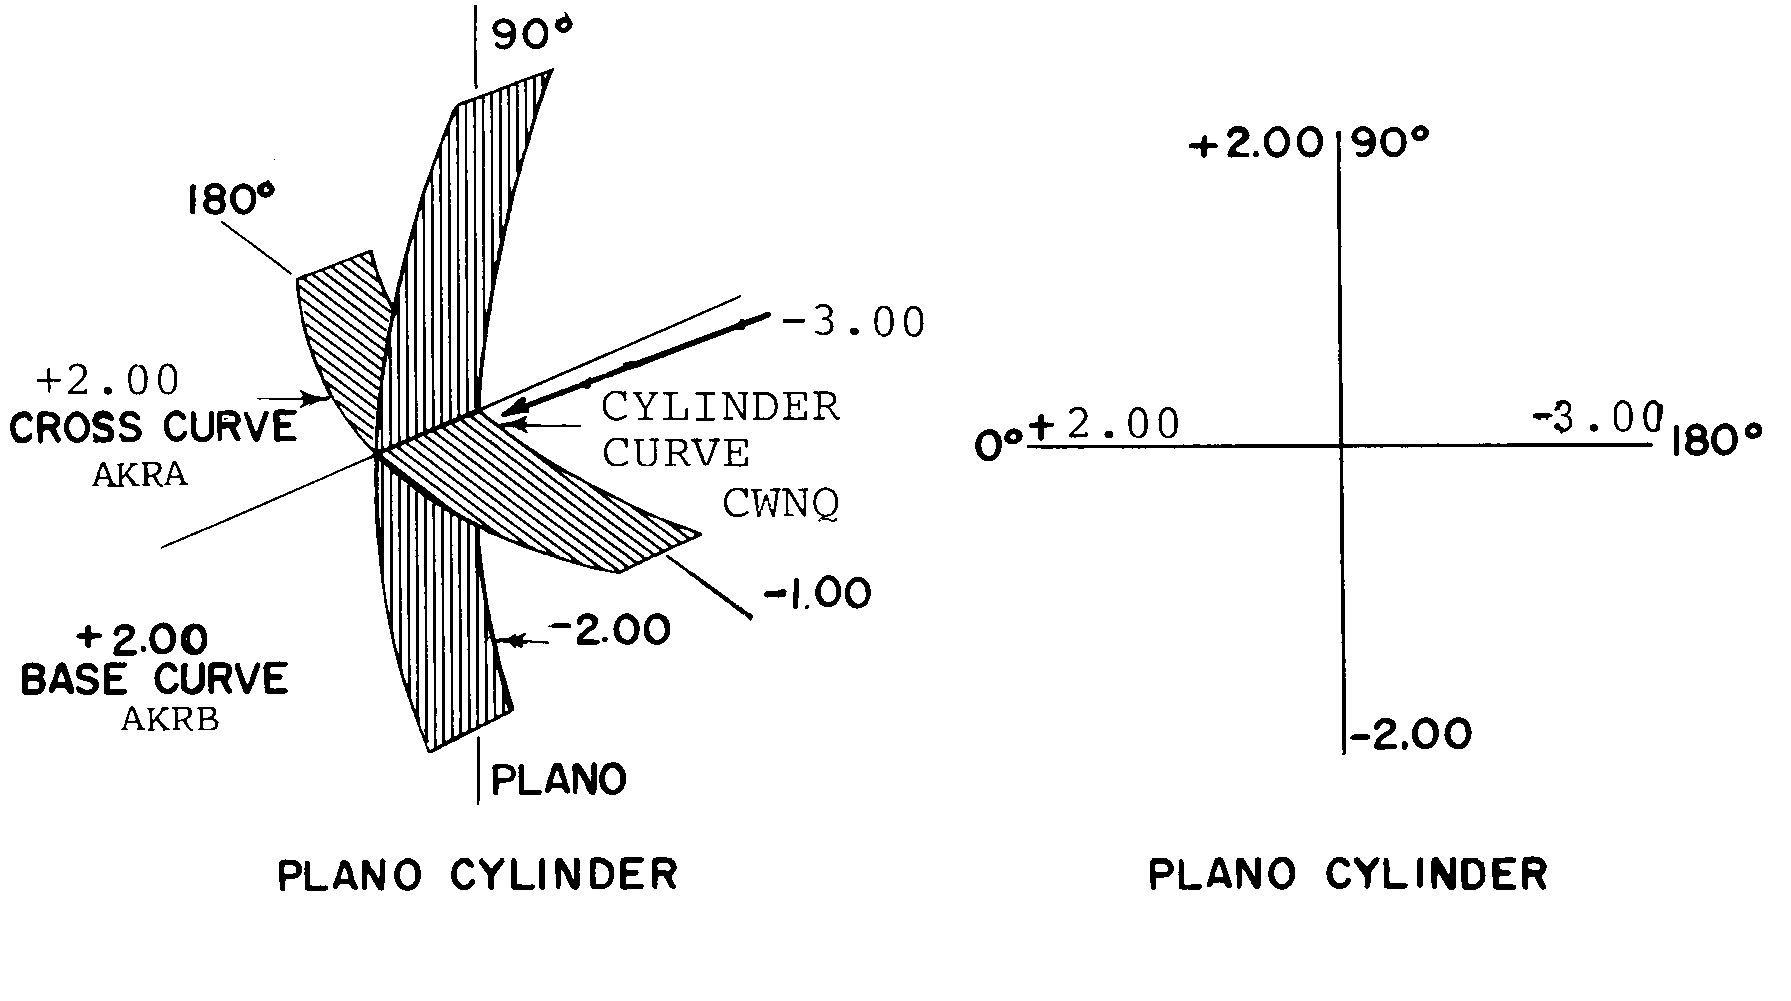 PLANO CYLINDER style nsn 6540-01-102-4299